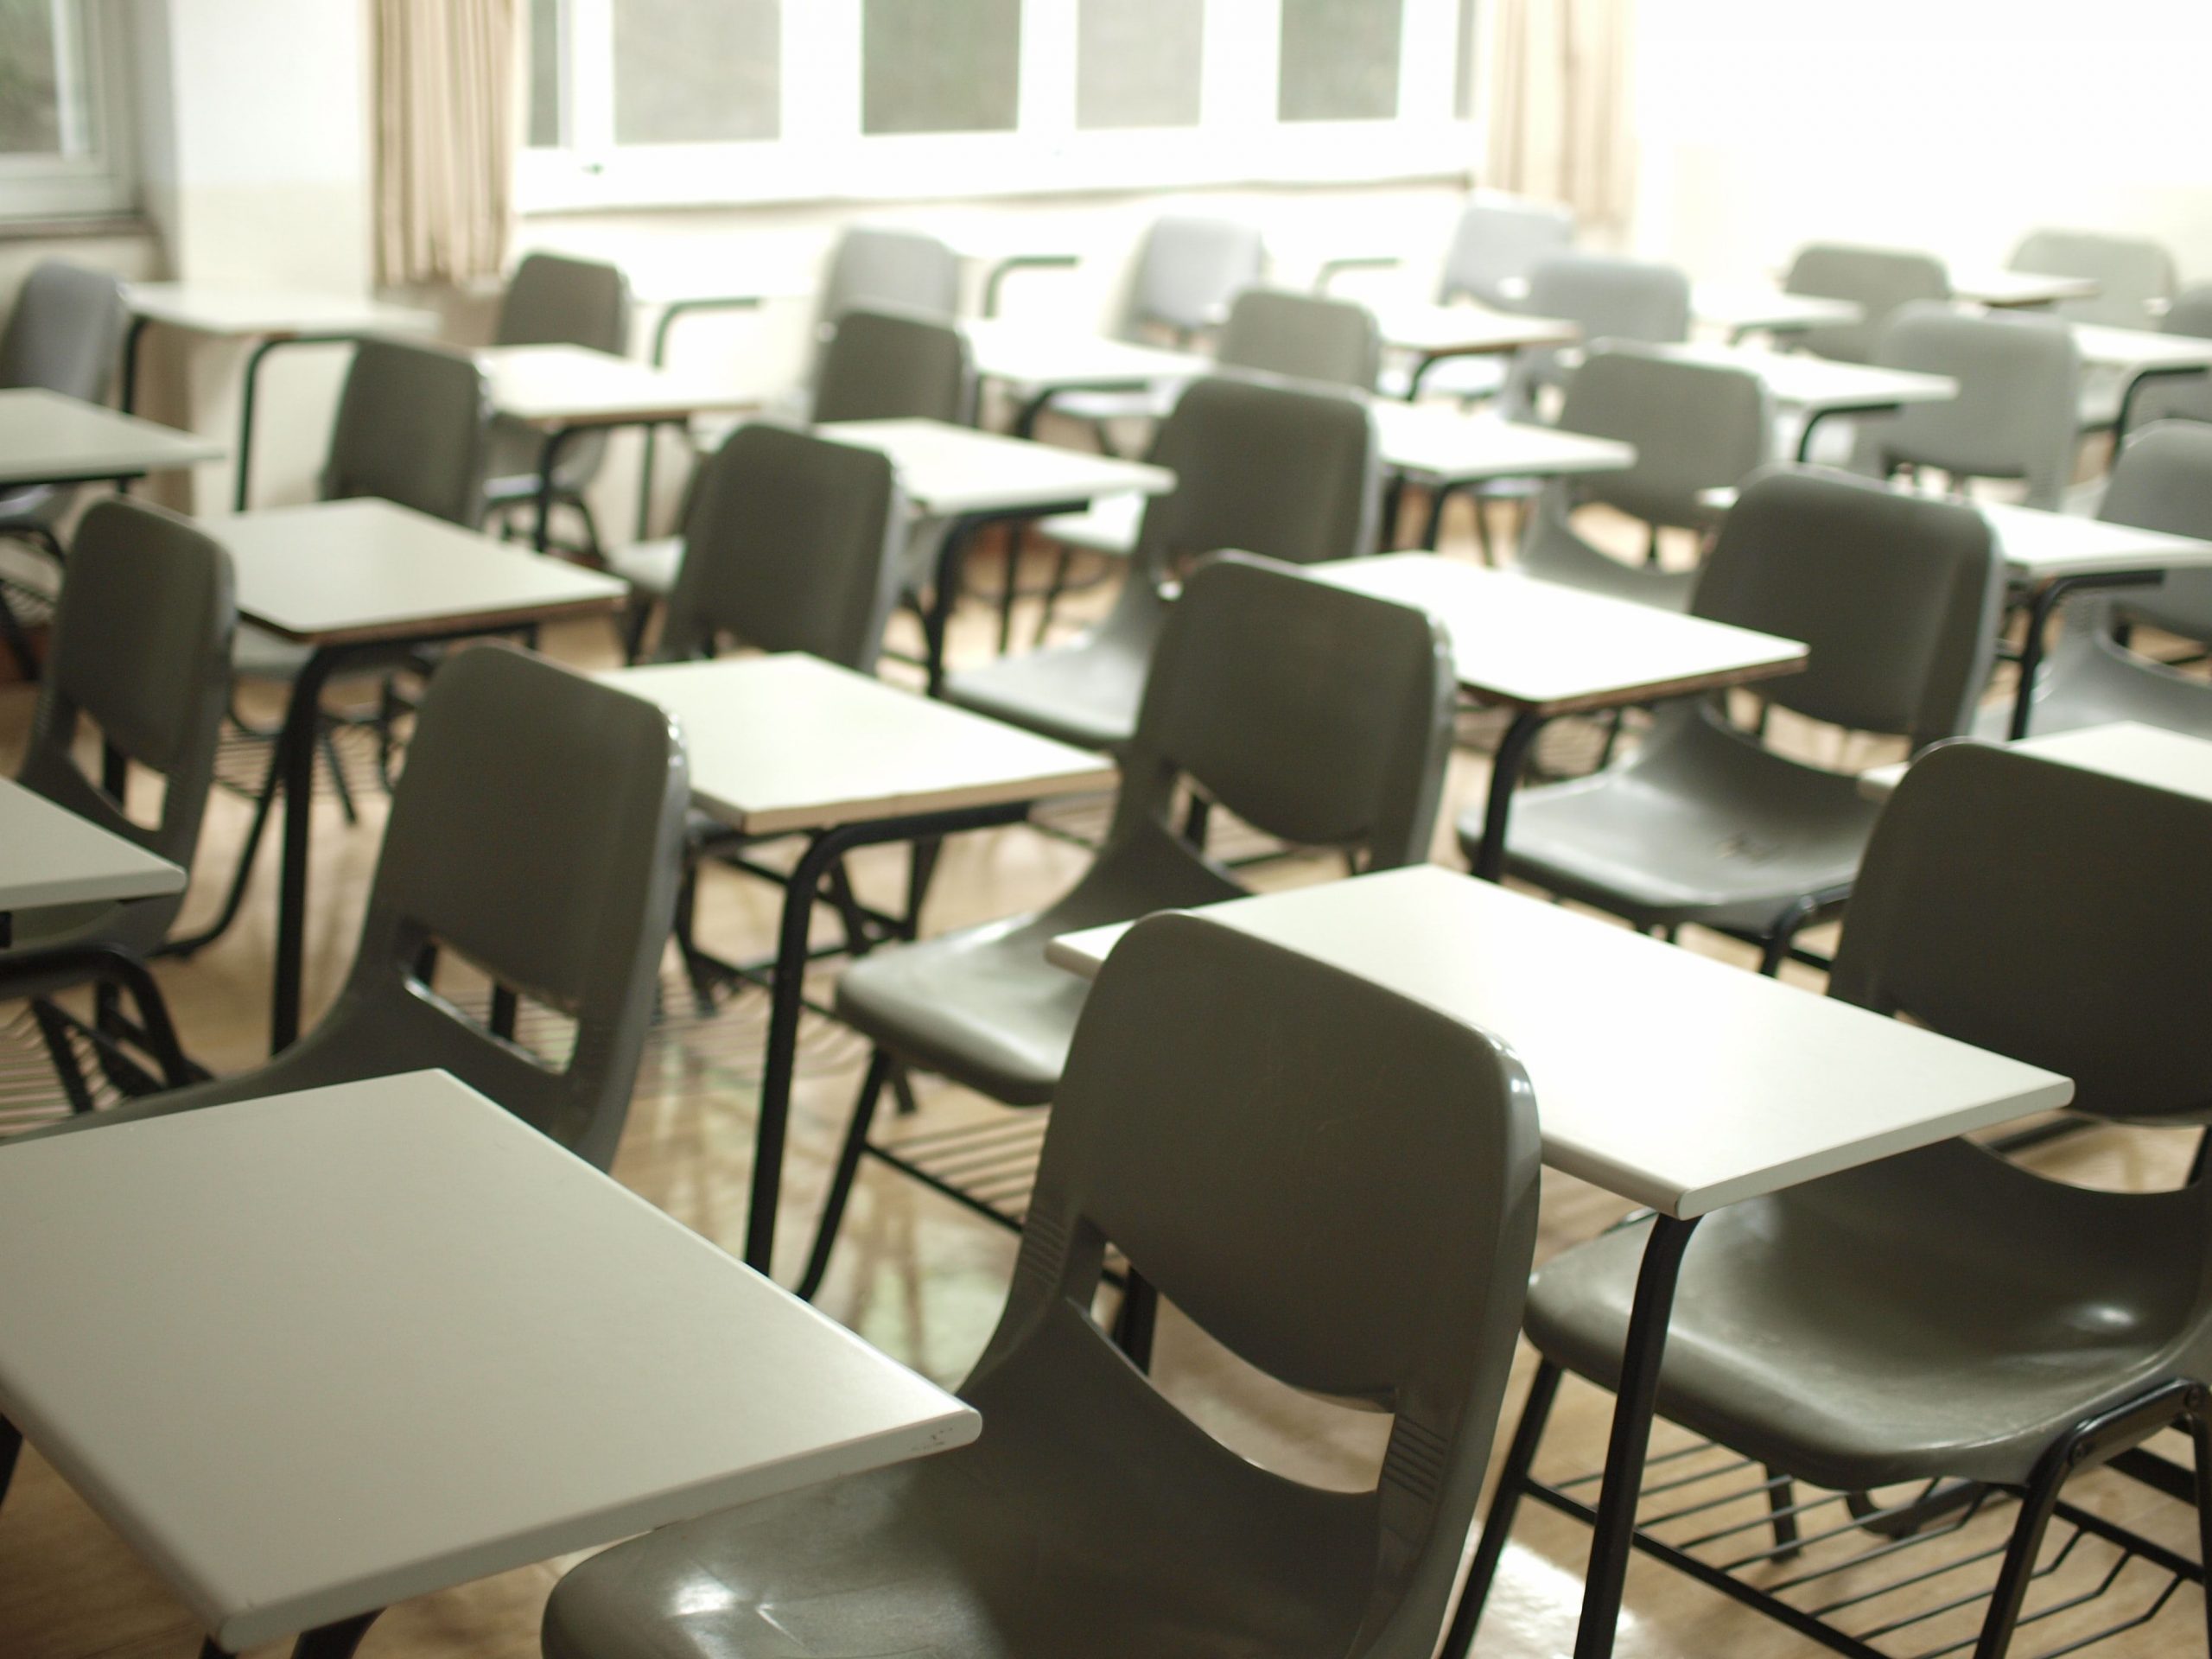 440 students quarantined in Florida 2 days after schools start